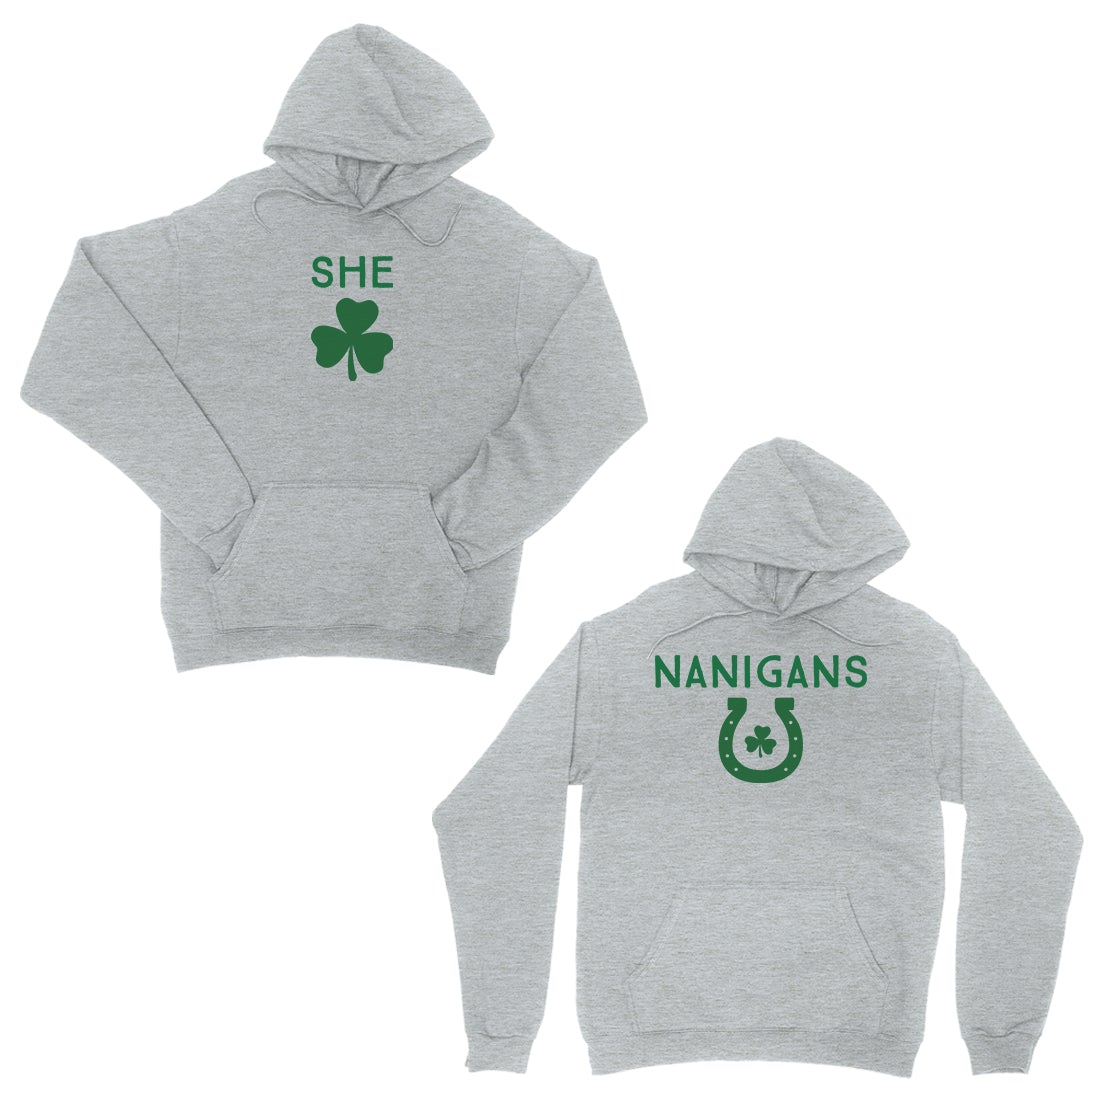 Shenanigans BFF Matching Hoodies Grey Funny St Patrick's Day Outfit